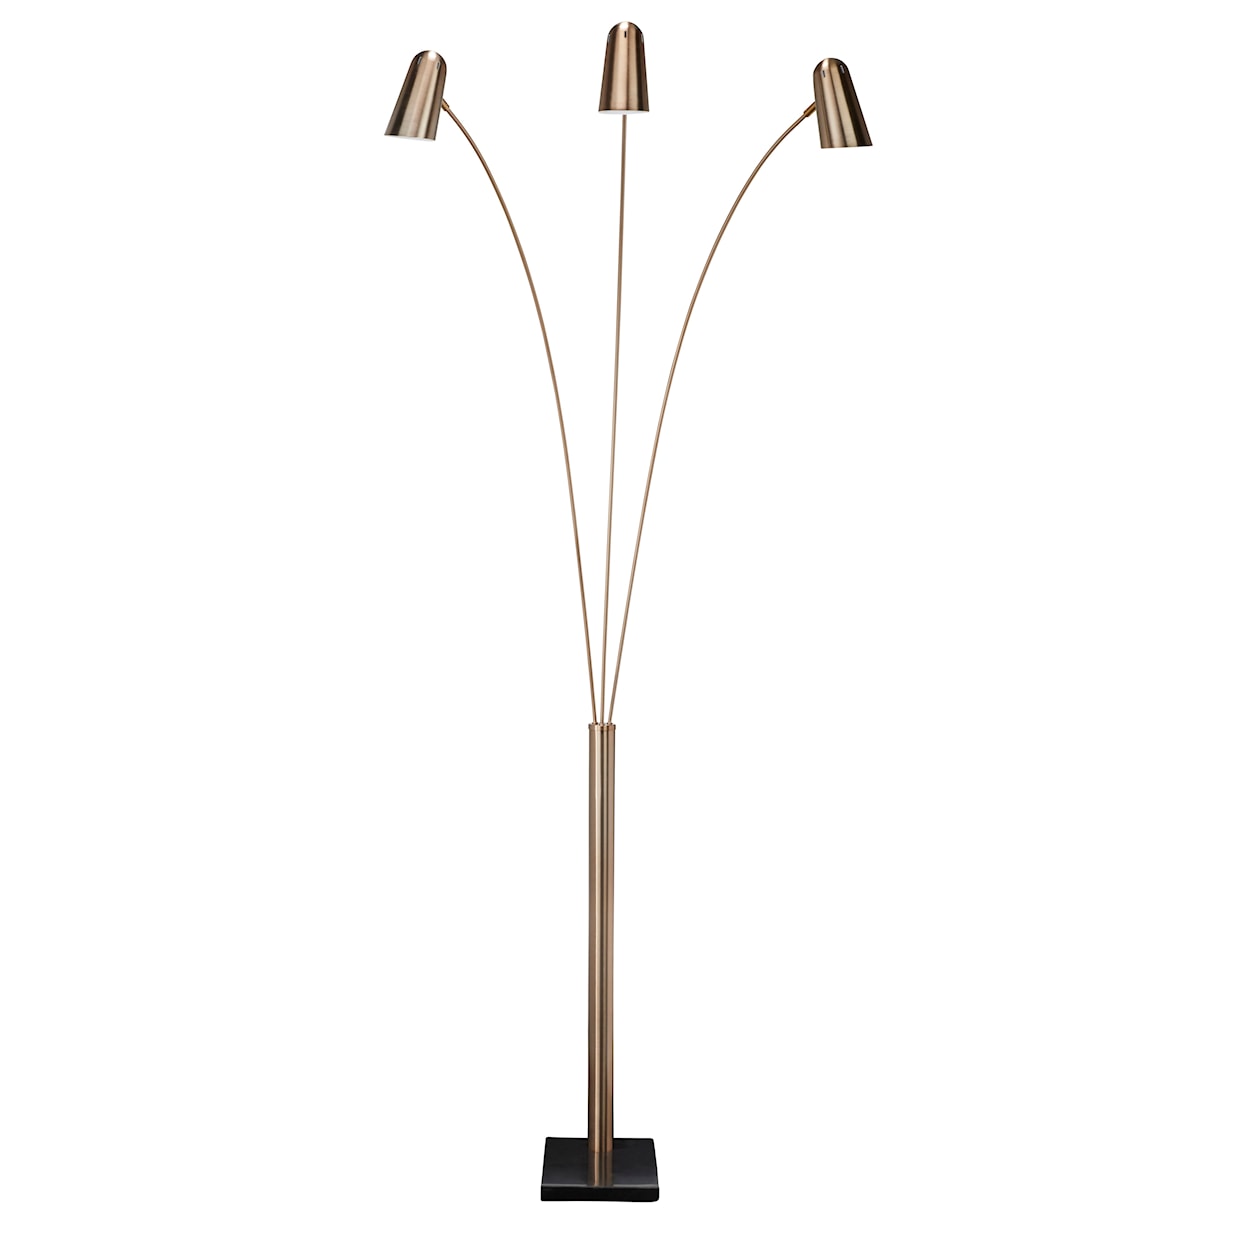 Signature Design by Ashley Lamps - Contemporary Colldale Arc Lamp